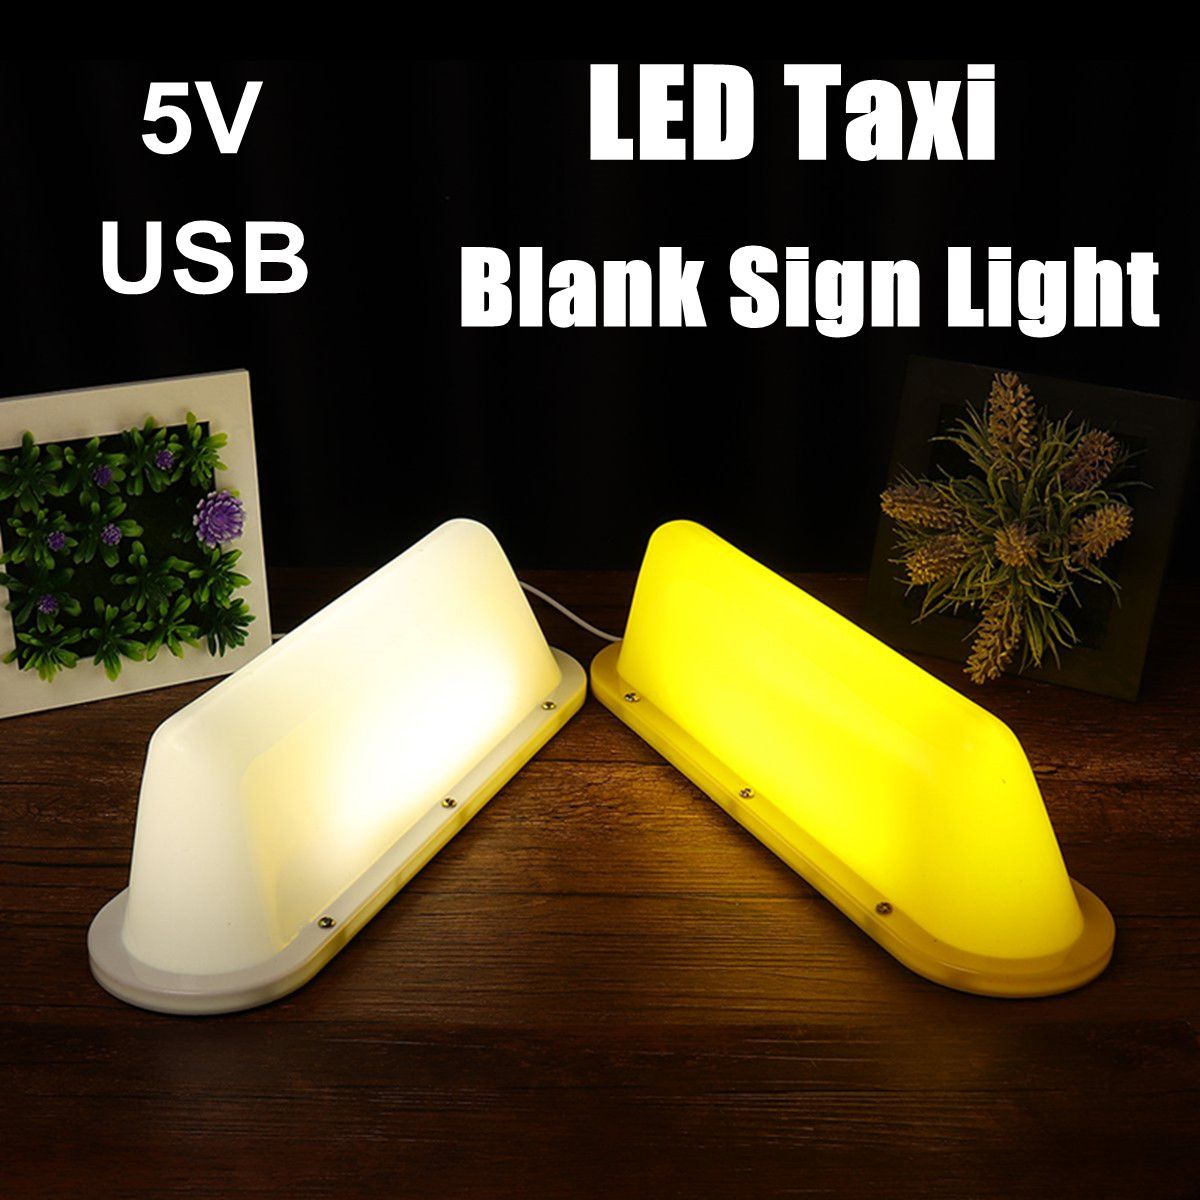 USB-Type-3W-12-LED-Blank-Taxi-Sign-Light-DIY-Uber-Car-Roof-Top-Super-Bright-Lamp-White-Color-with-Ma-1632603